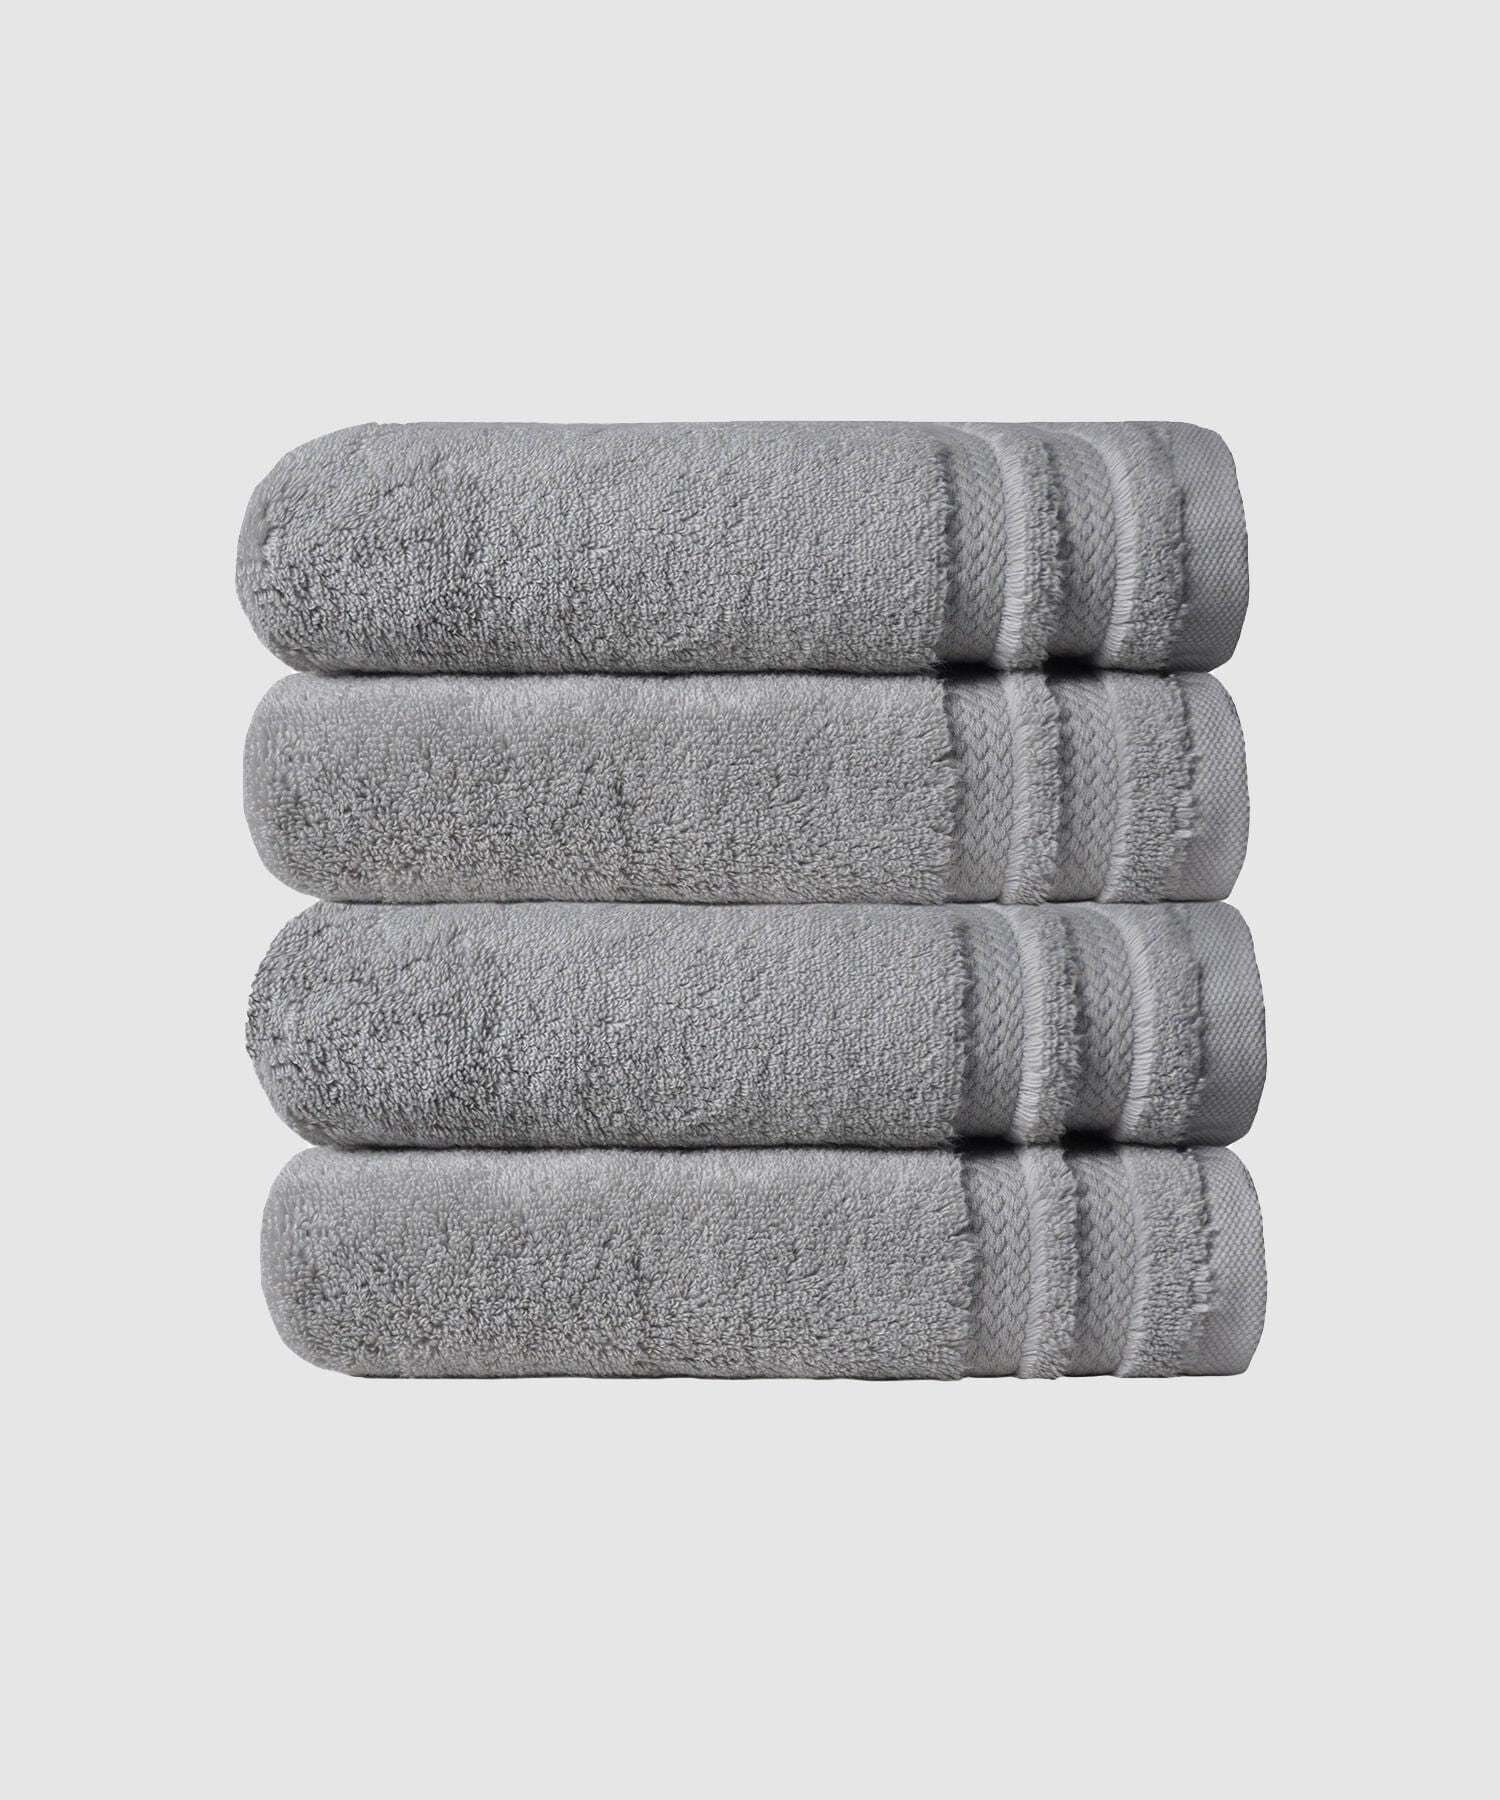 4 Pieces Hand Towels ₹1019/-